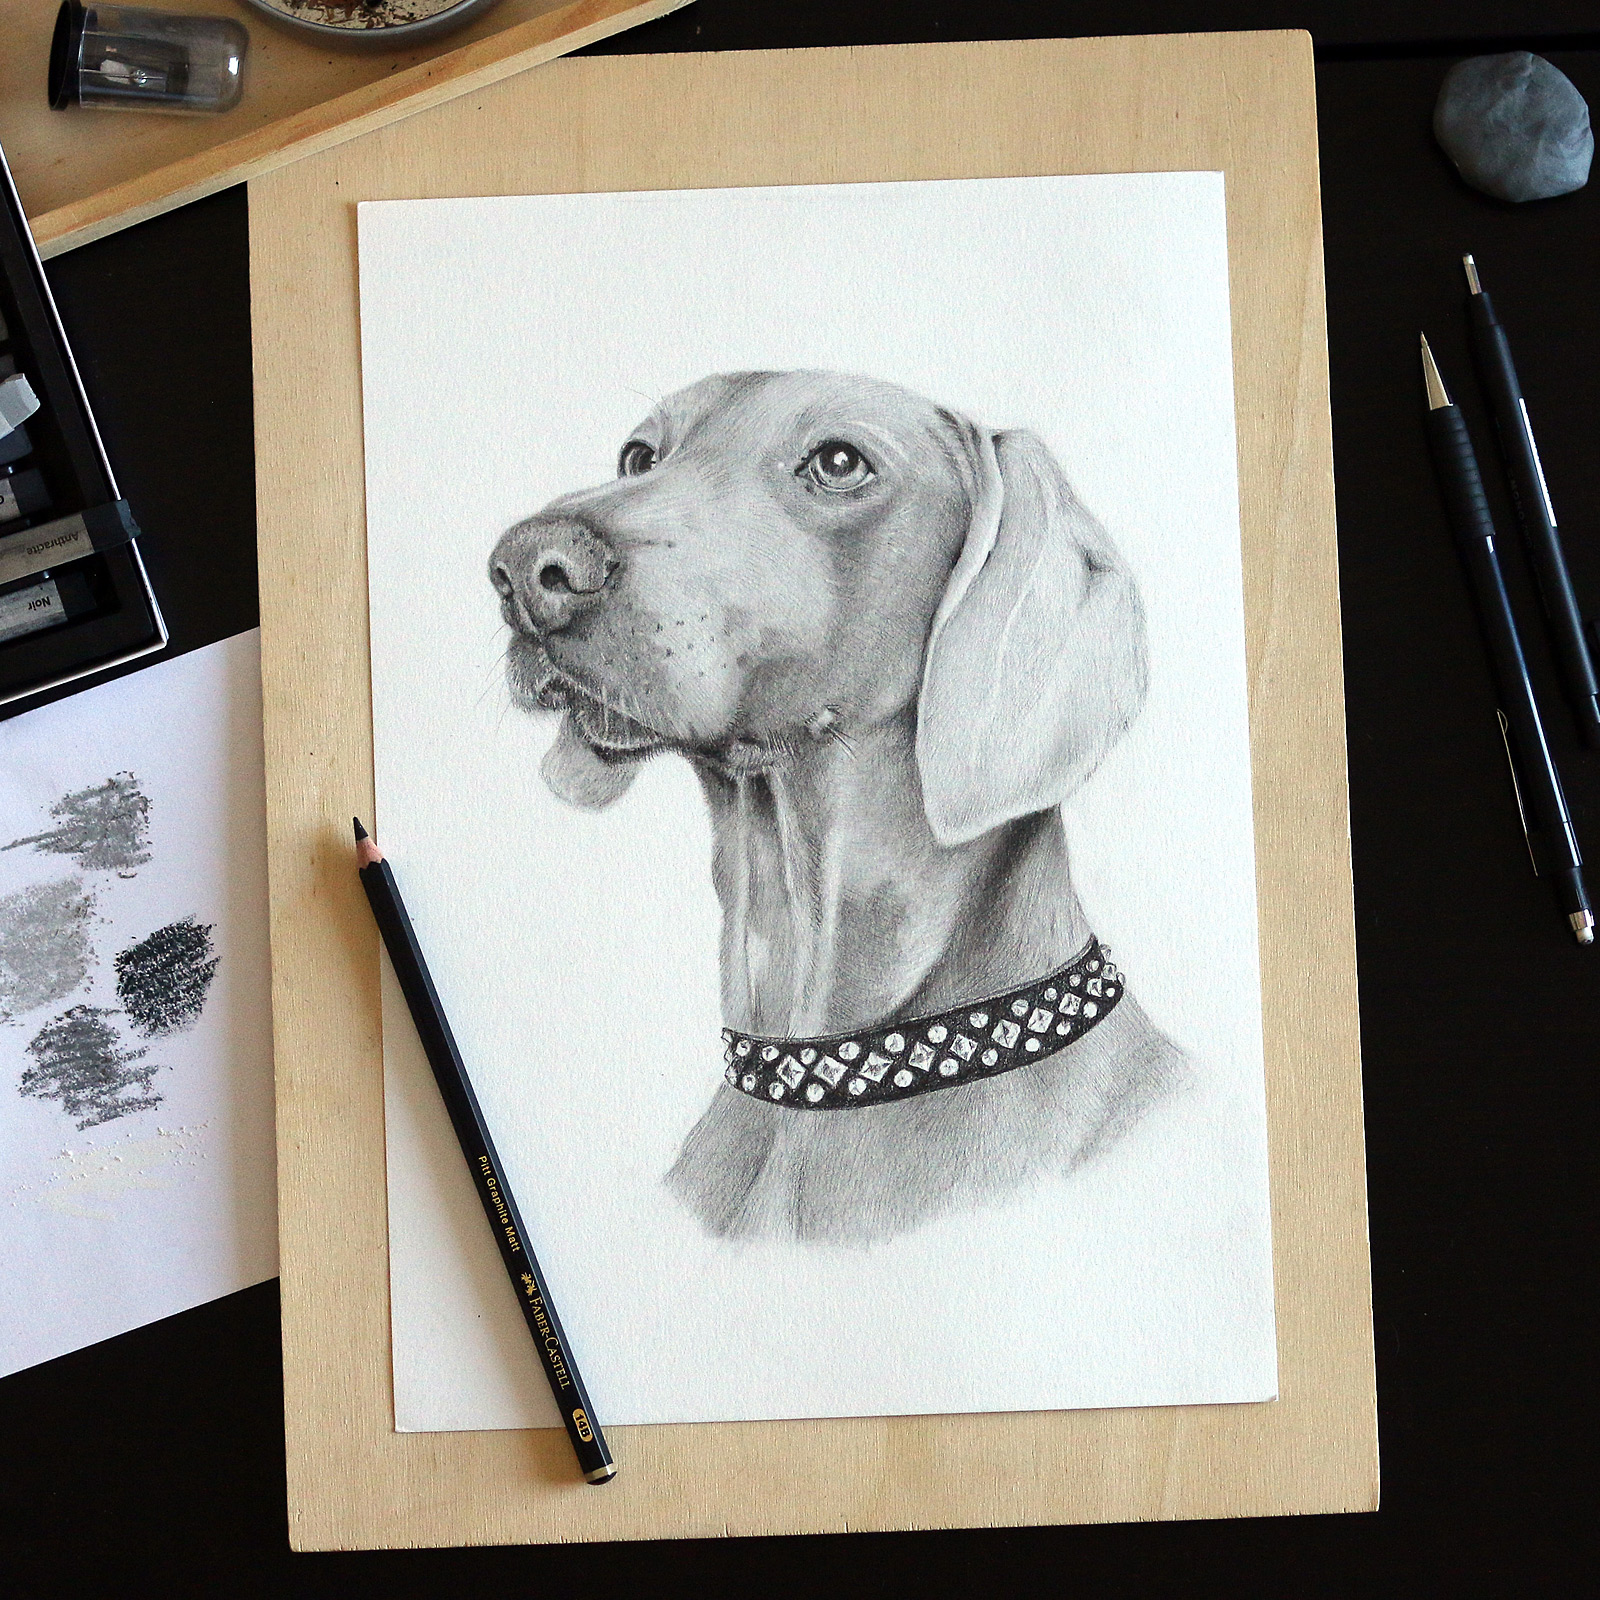 Finished drawing of a dog portrait by the artist Lisa Albrecht